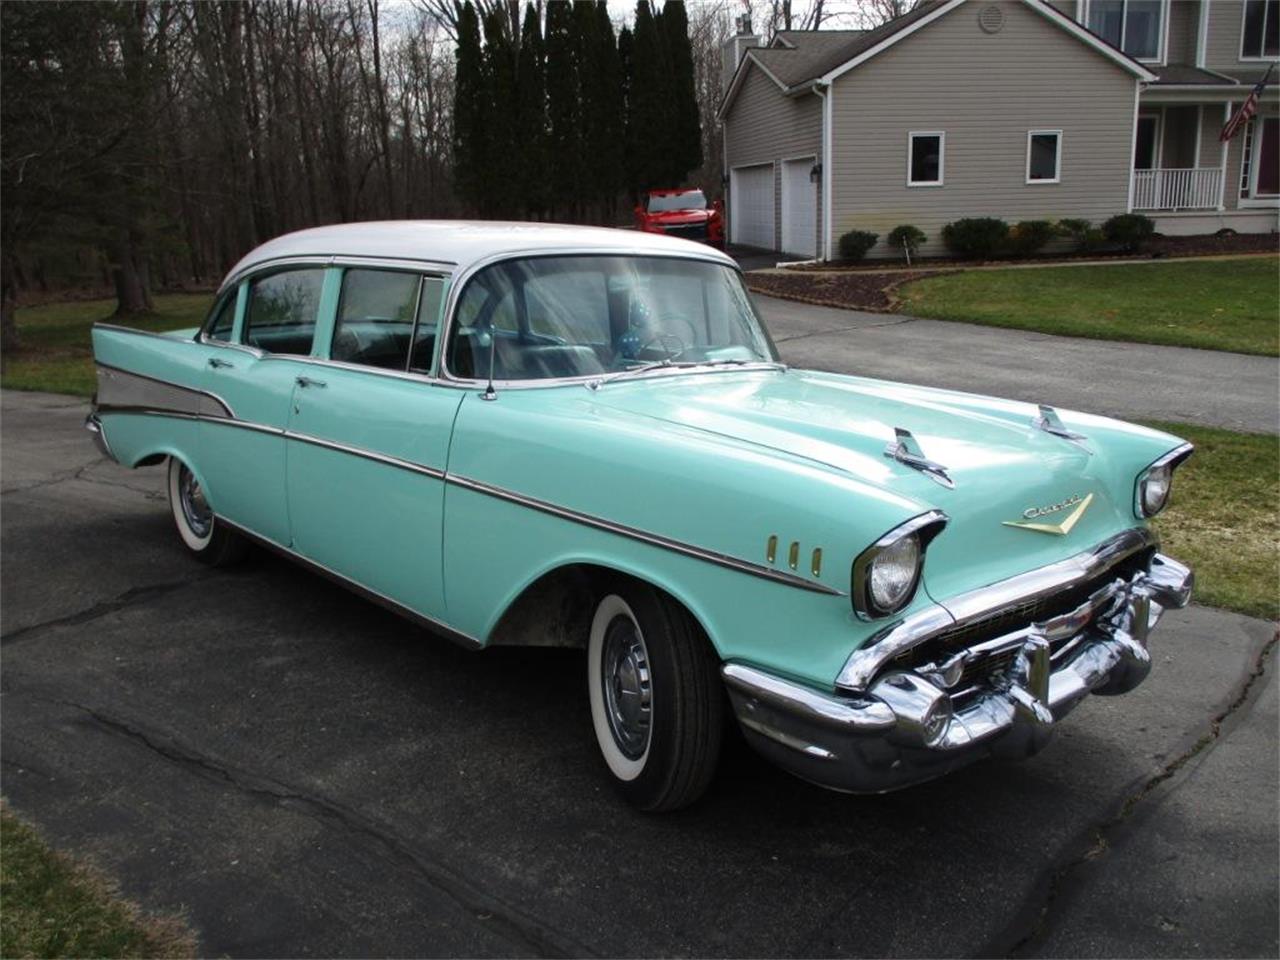 For Sale: 1957 Chevrolet Bel Air in Clarkston, Michigan for sale in Clarkston, MI